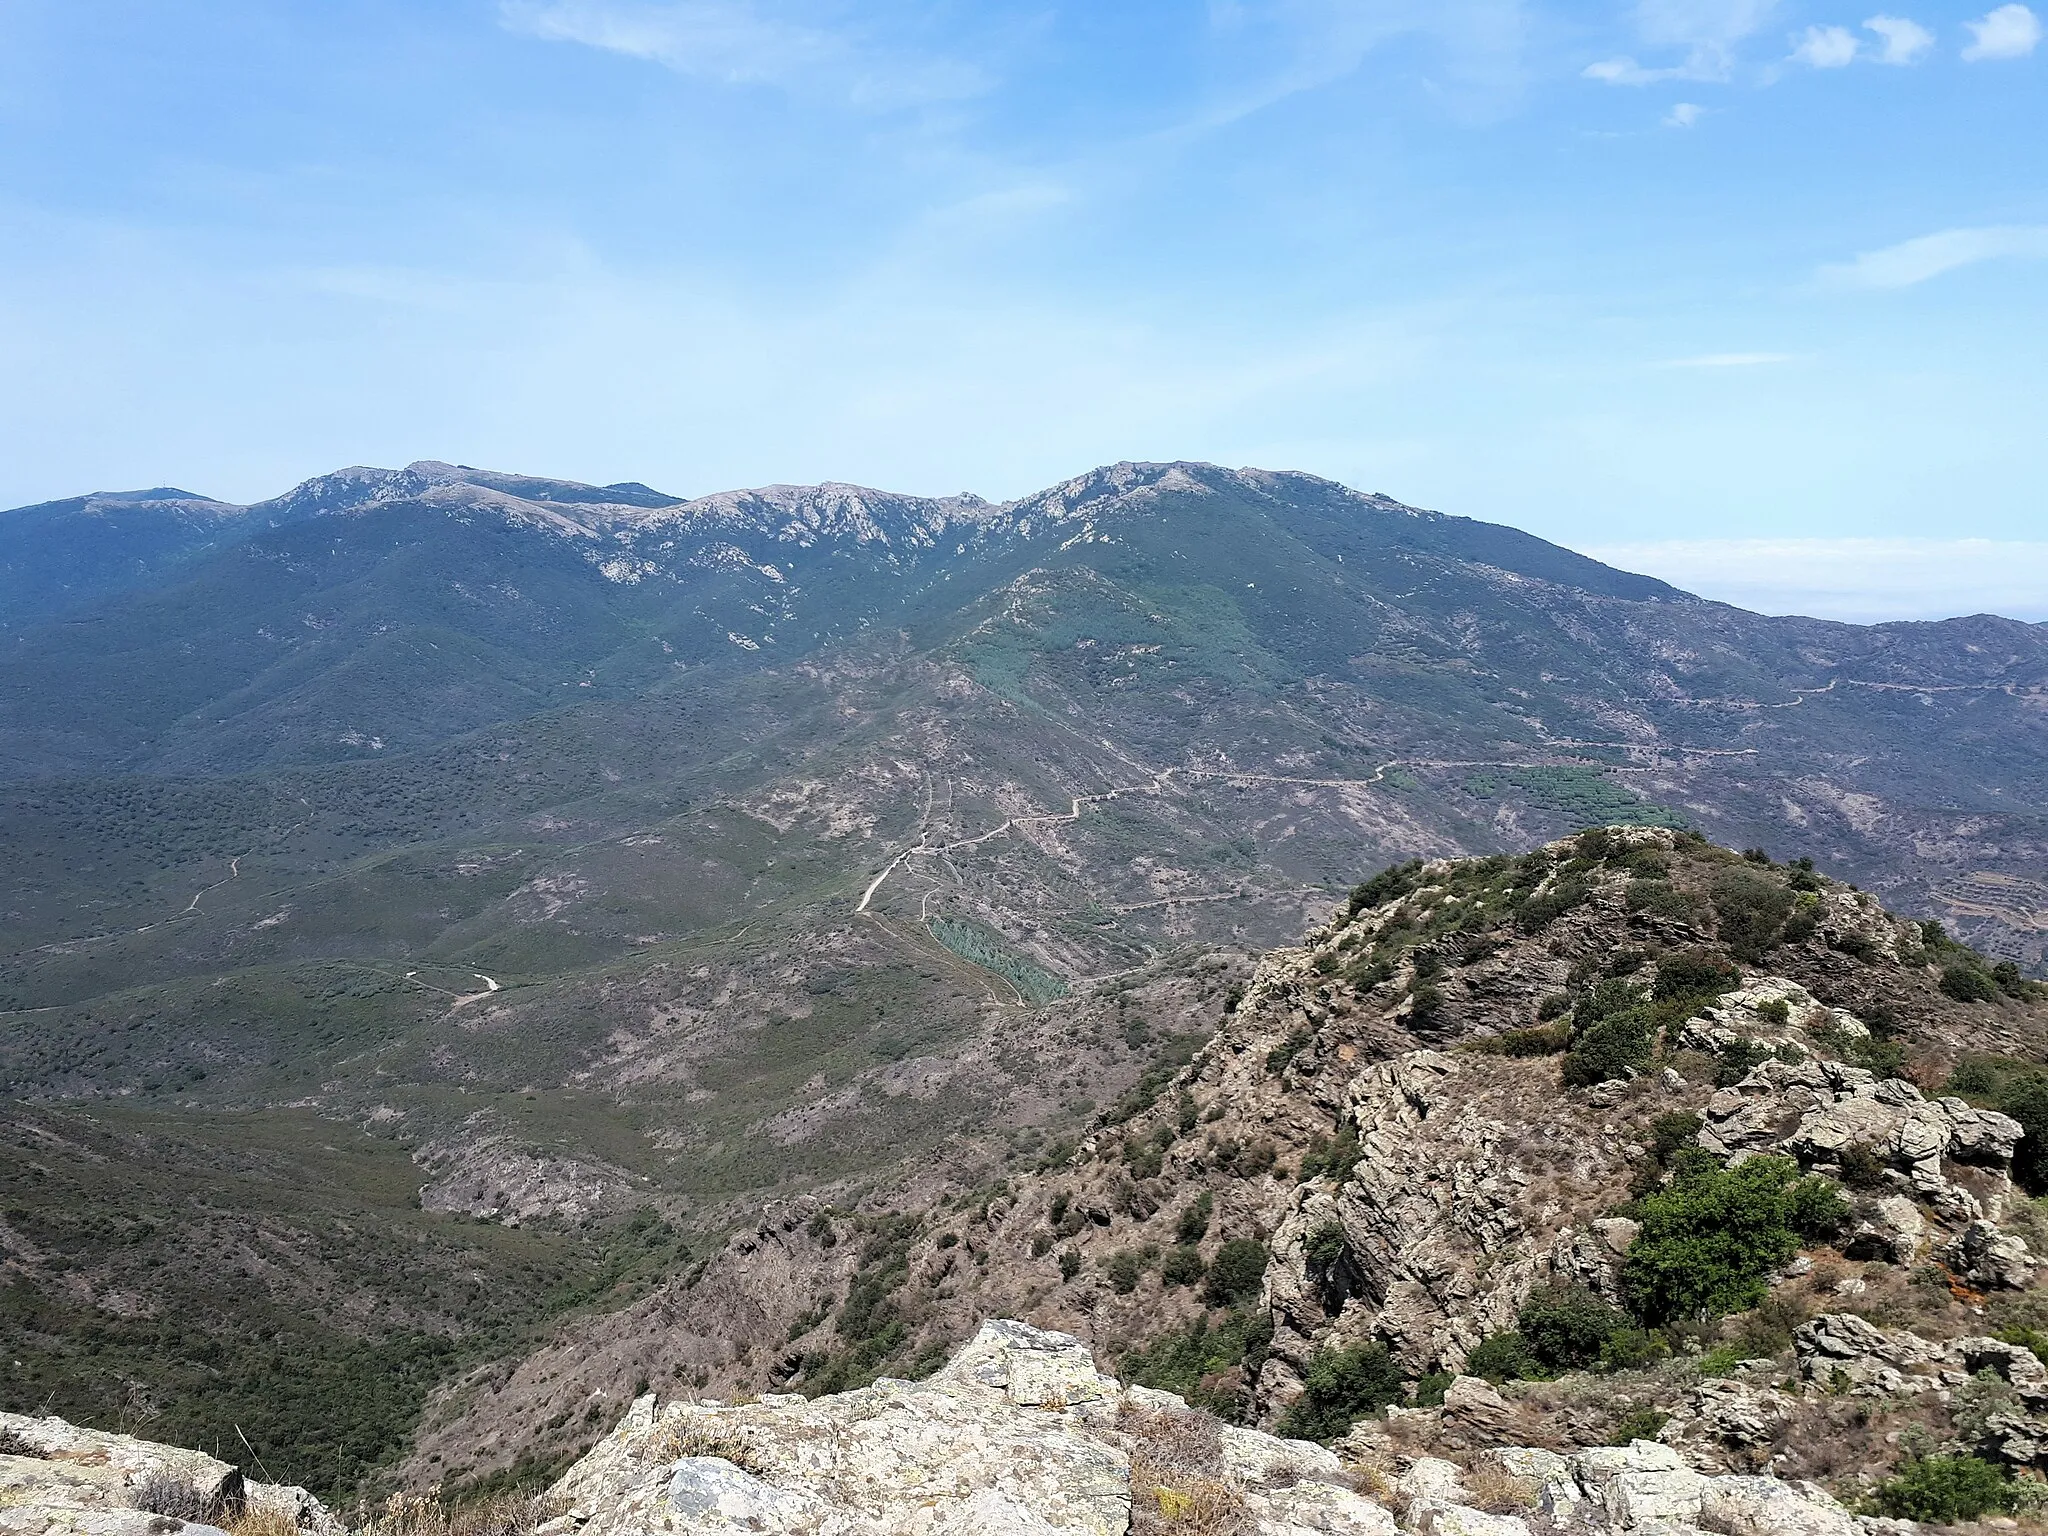 Photo showing: The col lies at an altitude of 355 metres in the Albères massif at the eastern end of the Pyrenees mountain chain. The frontier between Spain (Catalonia, to the left) and France (to the right) runs from the Puig de la Calma (718 metres) down to the col, then up to Puig Sallfort (981 metres).
Almost the whole area in the image is underlain by Cambrian and pre-Cambrian metasediments, principally schist. Hercynian granite outcrops along the crest of the Albères, which runs westwards (to the left) from Puig de Sallfort.
The Col de Banyuls lies along a fault line which traverses this part of the Albères in a NW-SE direction. See:

B. Laumonier et al., "Notice explicative de la feuille Argelès-sur-Mer - Cerbère (1097) à 1/50 000", BRGM Éditions, Orléans, 2015 (page 80), online at: http://ficheinfoterre.brgm.fr/Notices/1097N.pdf.